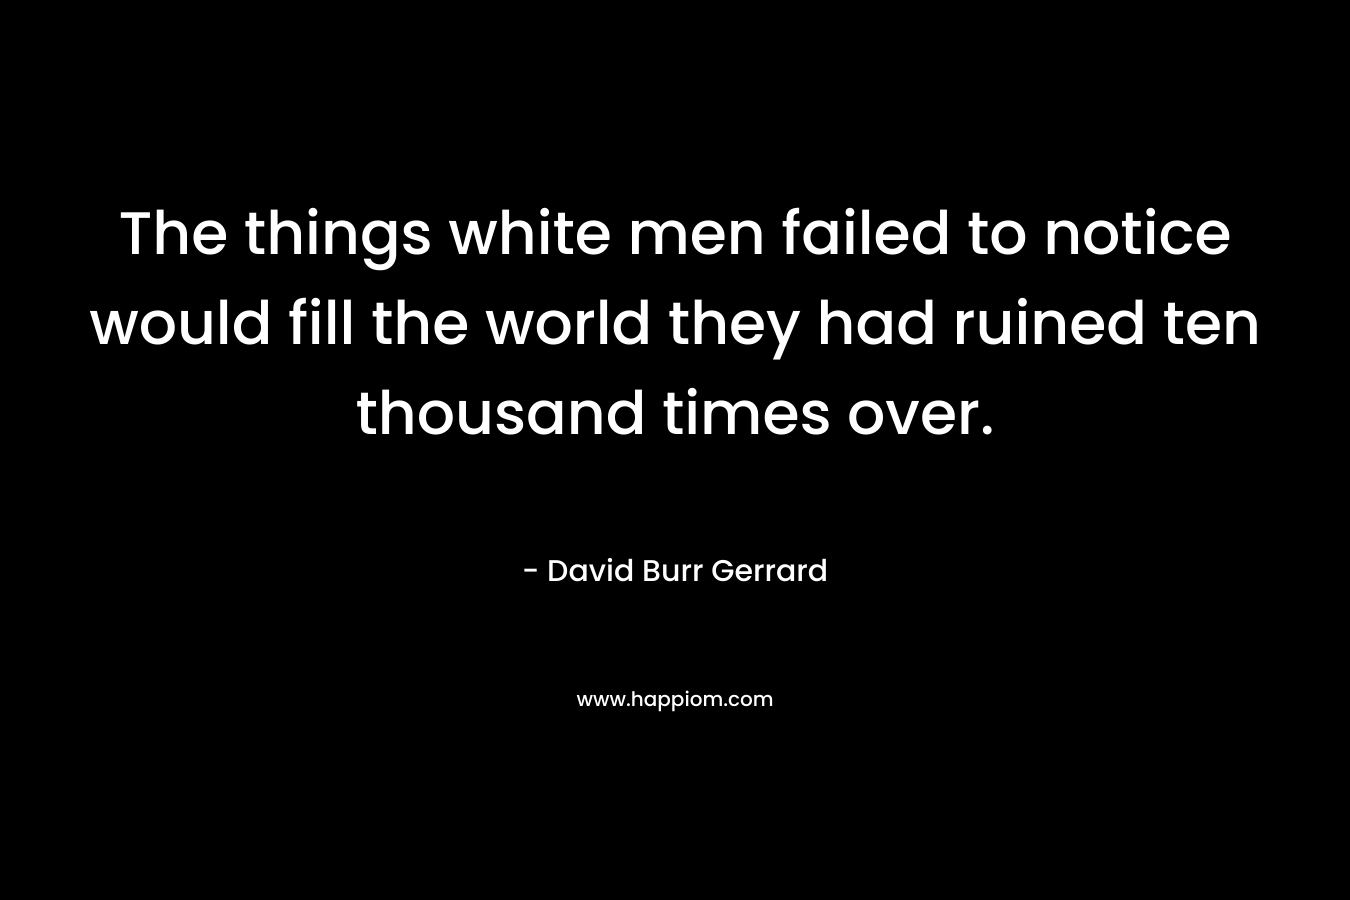 The things white men failed to notice would fill the world they had ruined ten thousand times over. – David Burr Gerrard